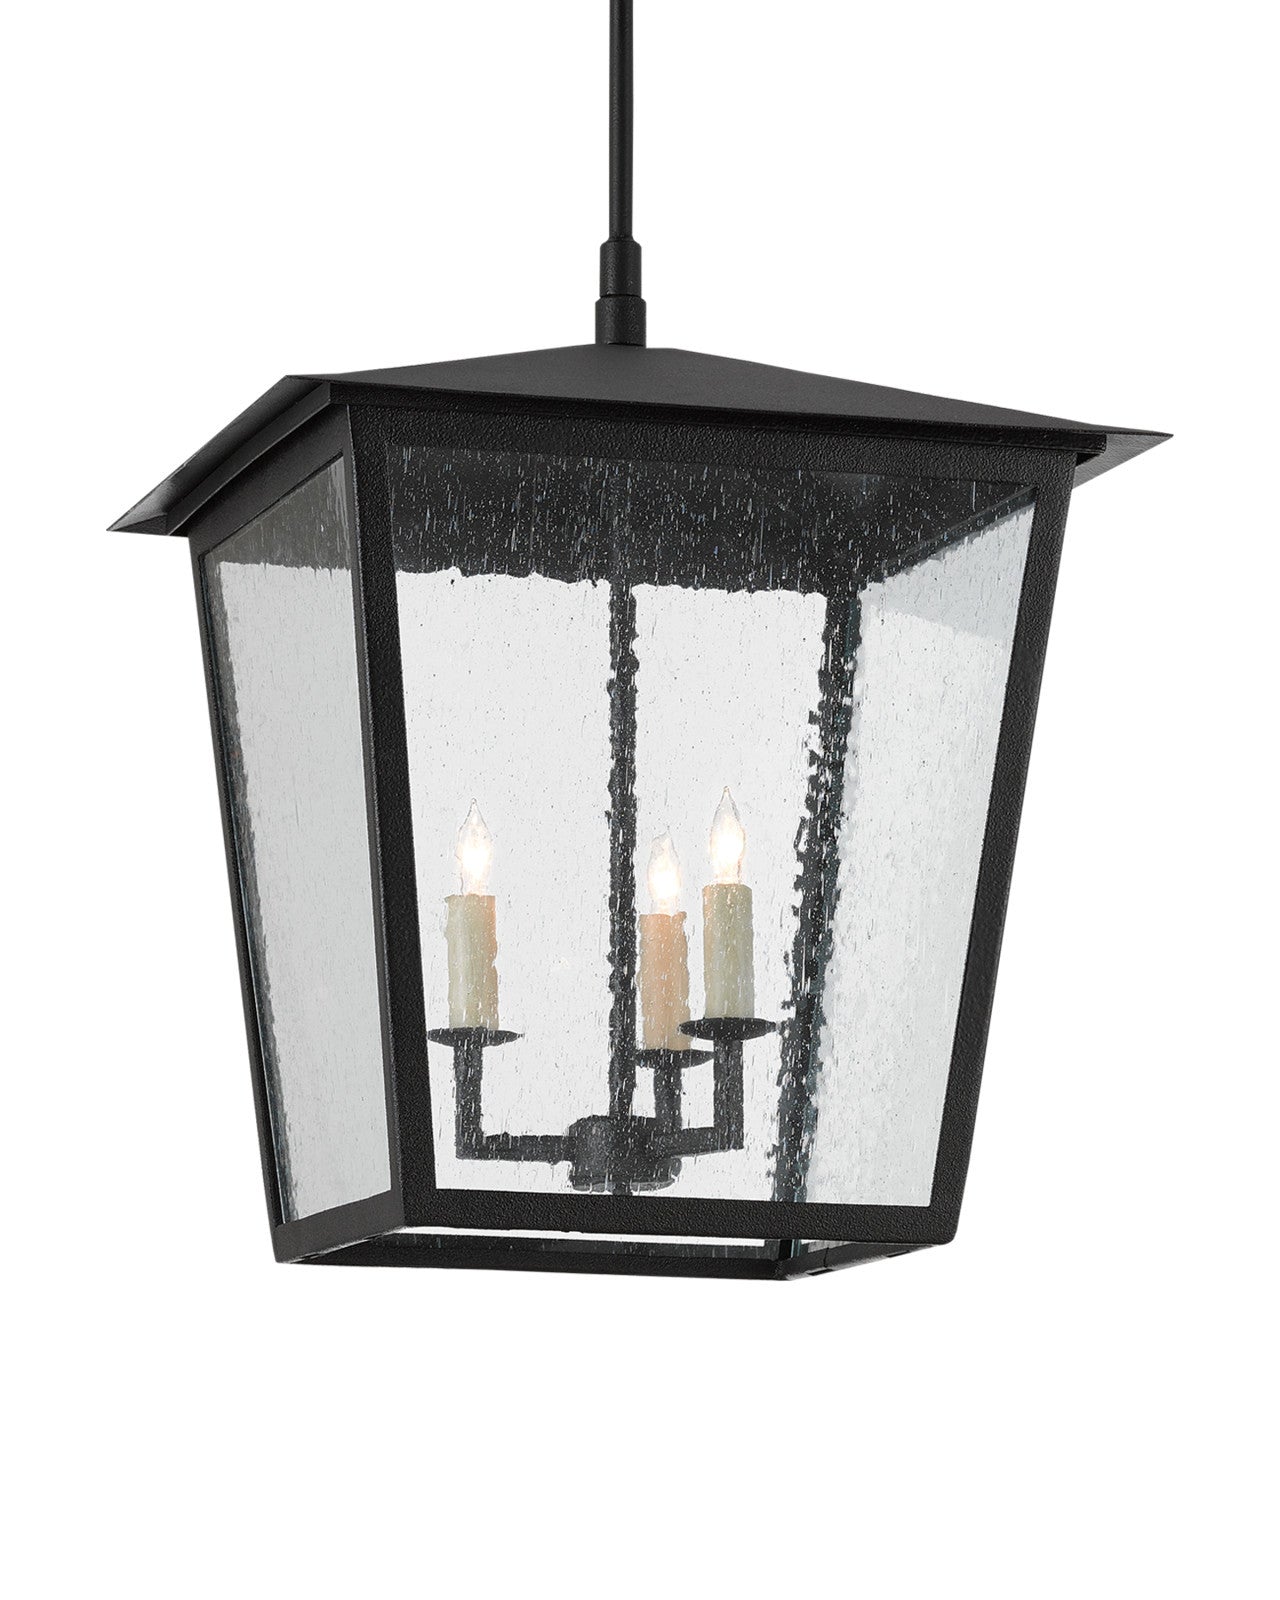 Bening Large Outdoor Lantern by Currey & Co.